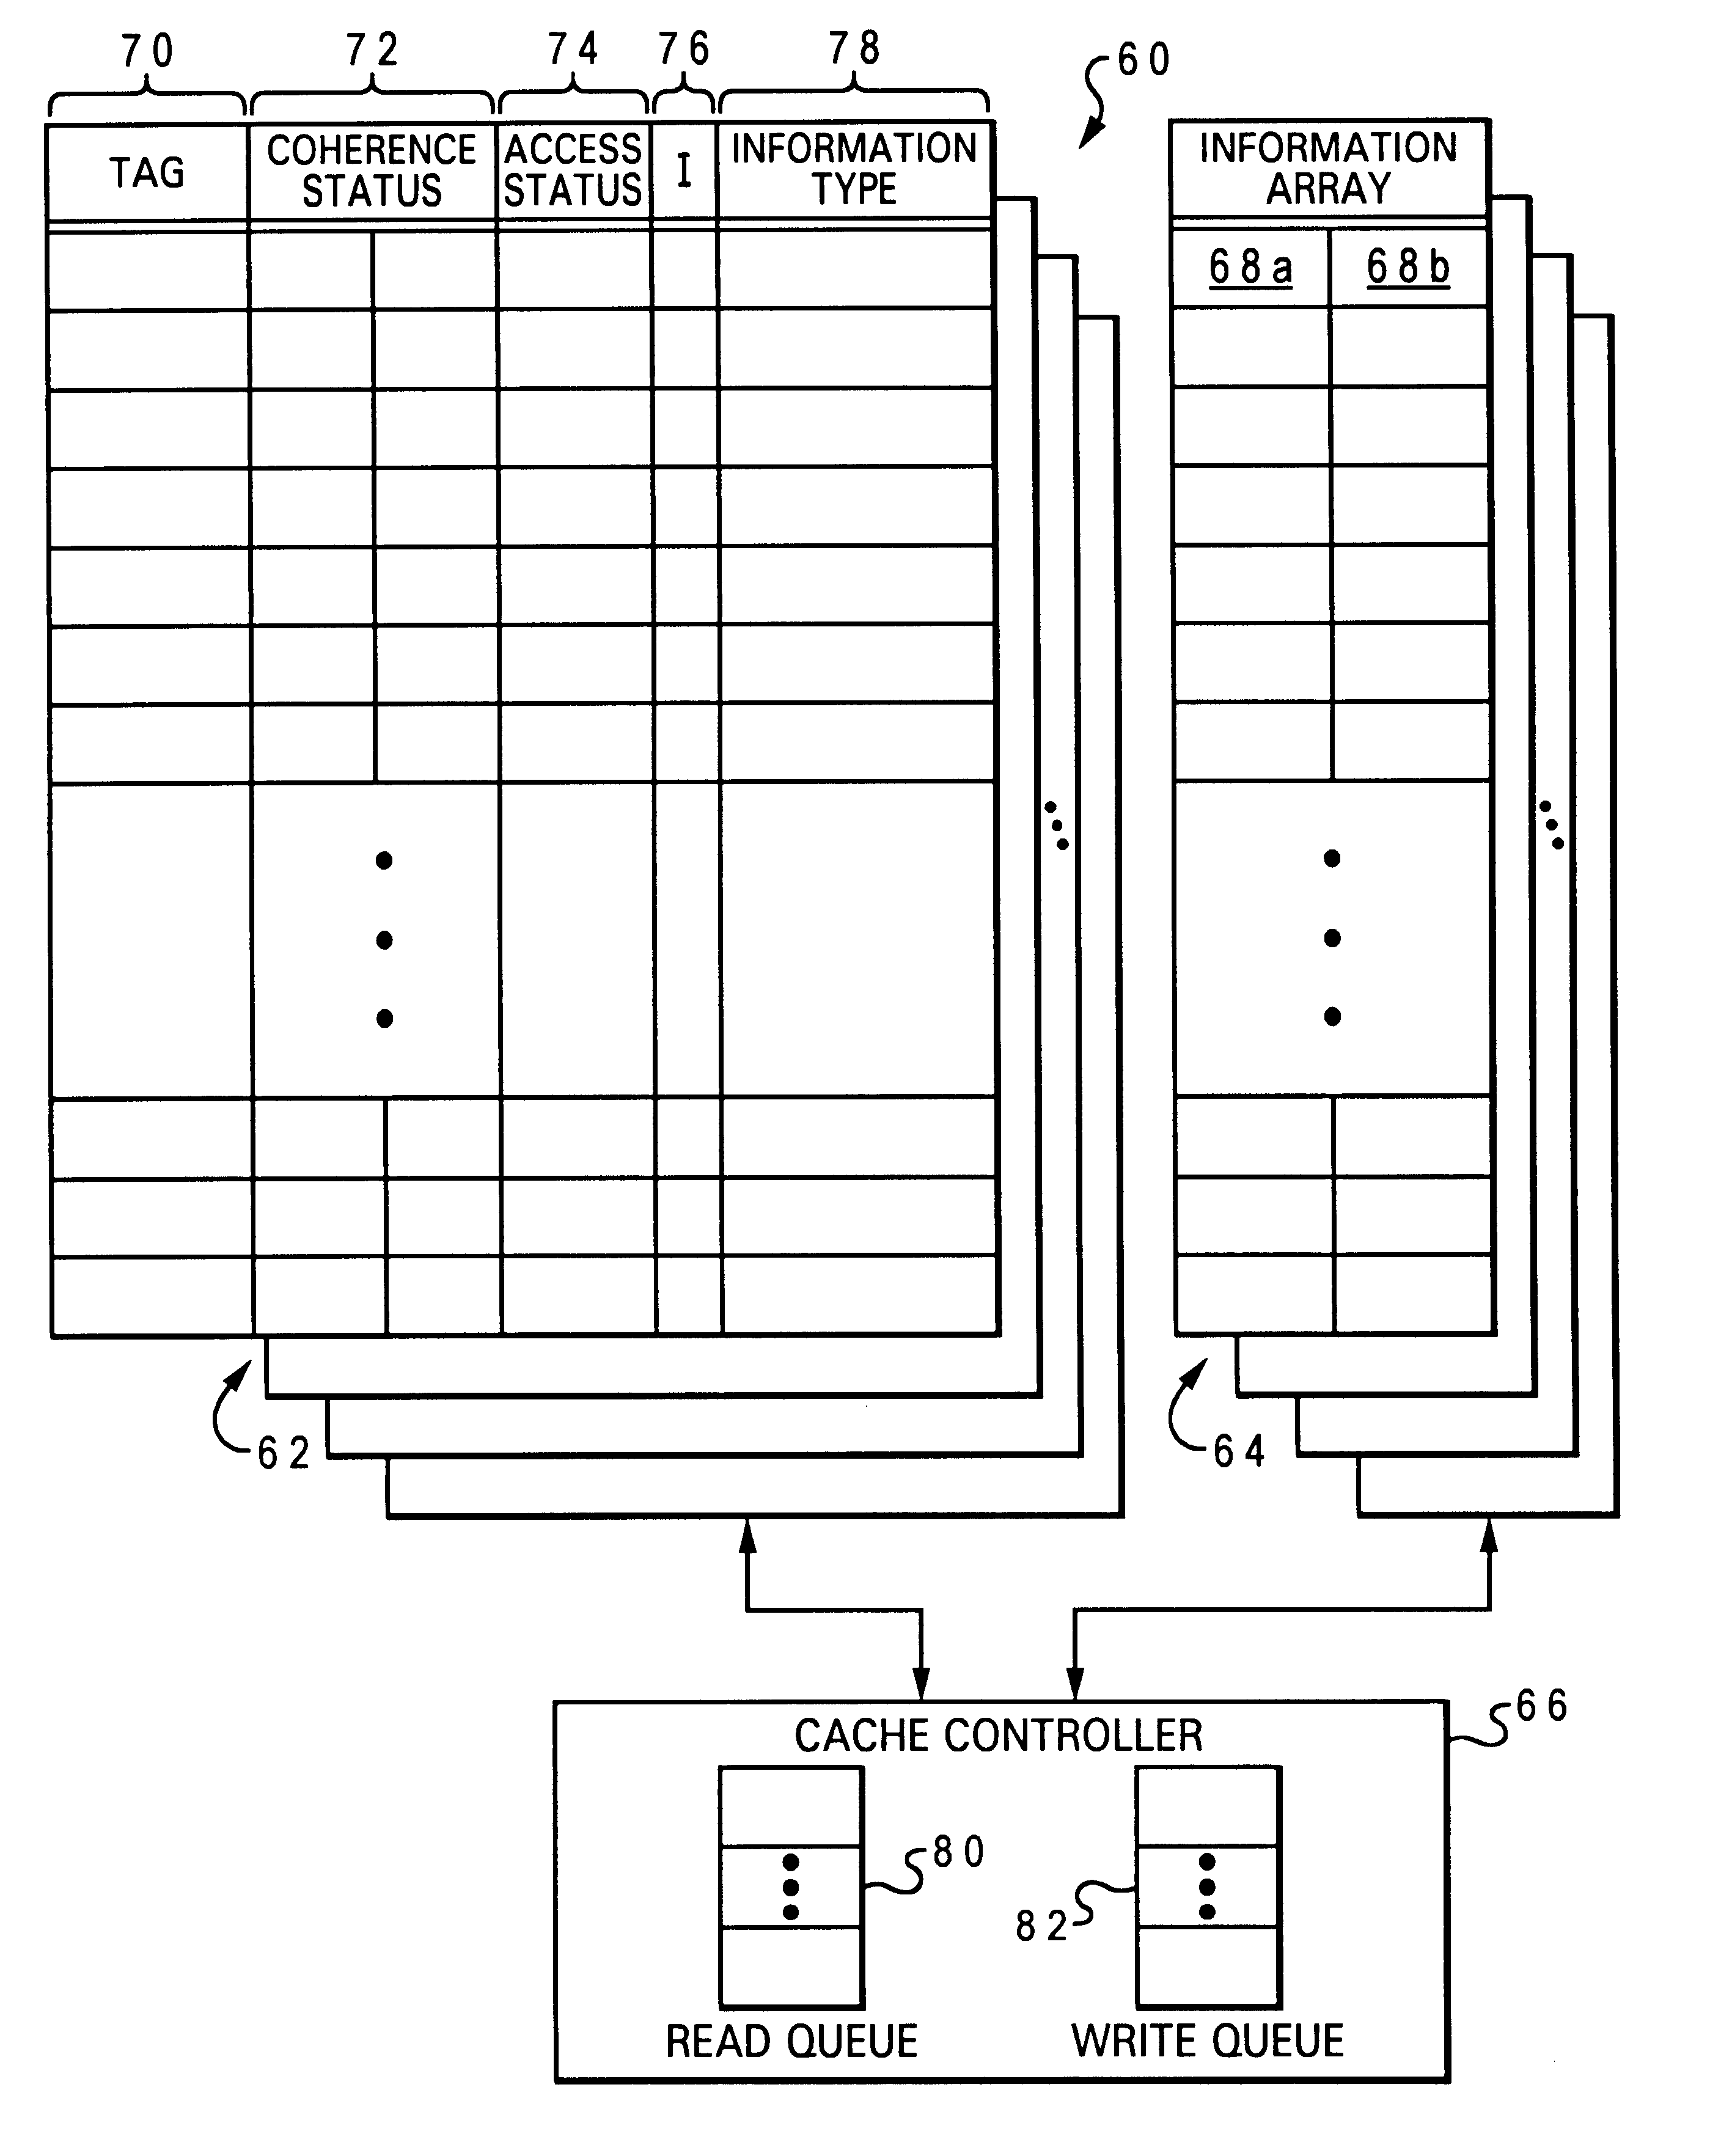 Method of cache management to store information in particular regions of the cache according to information-type